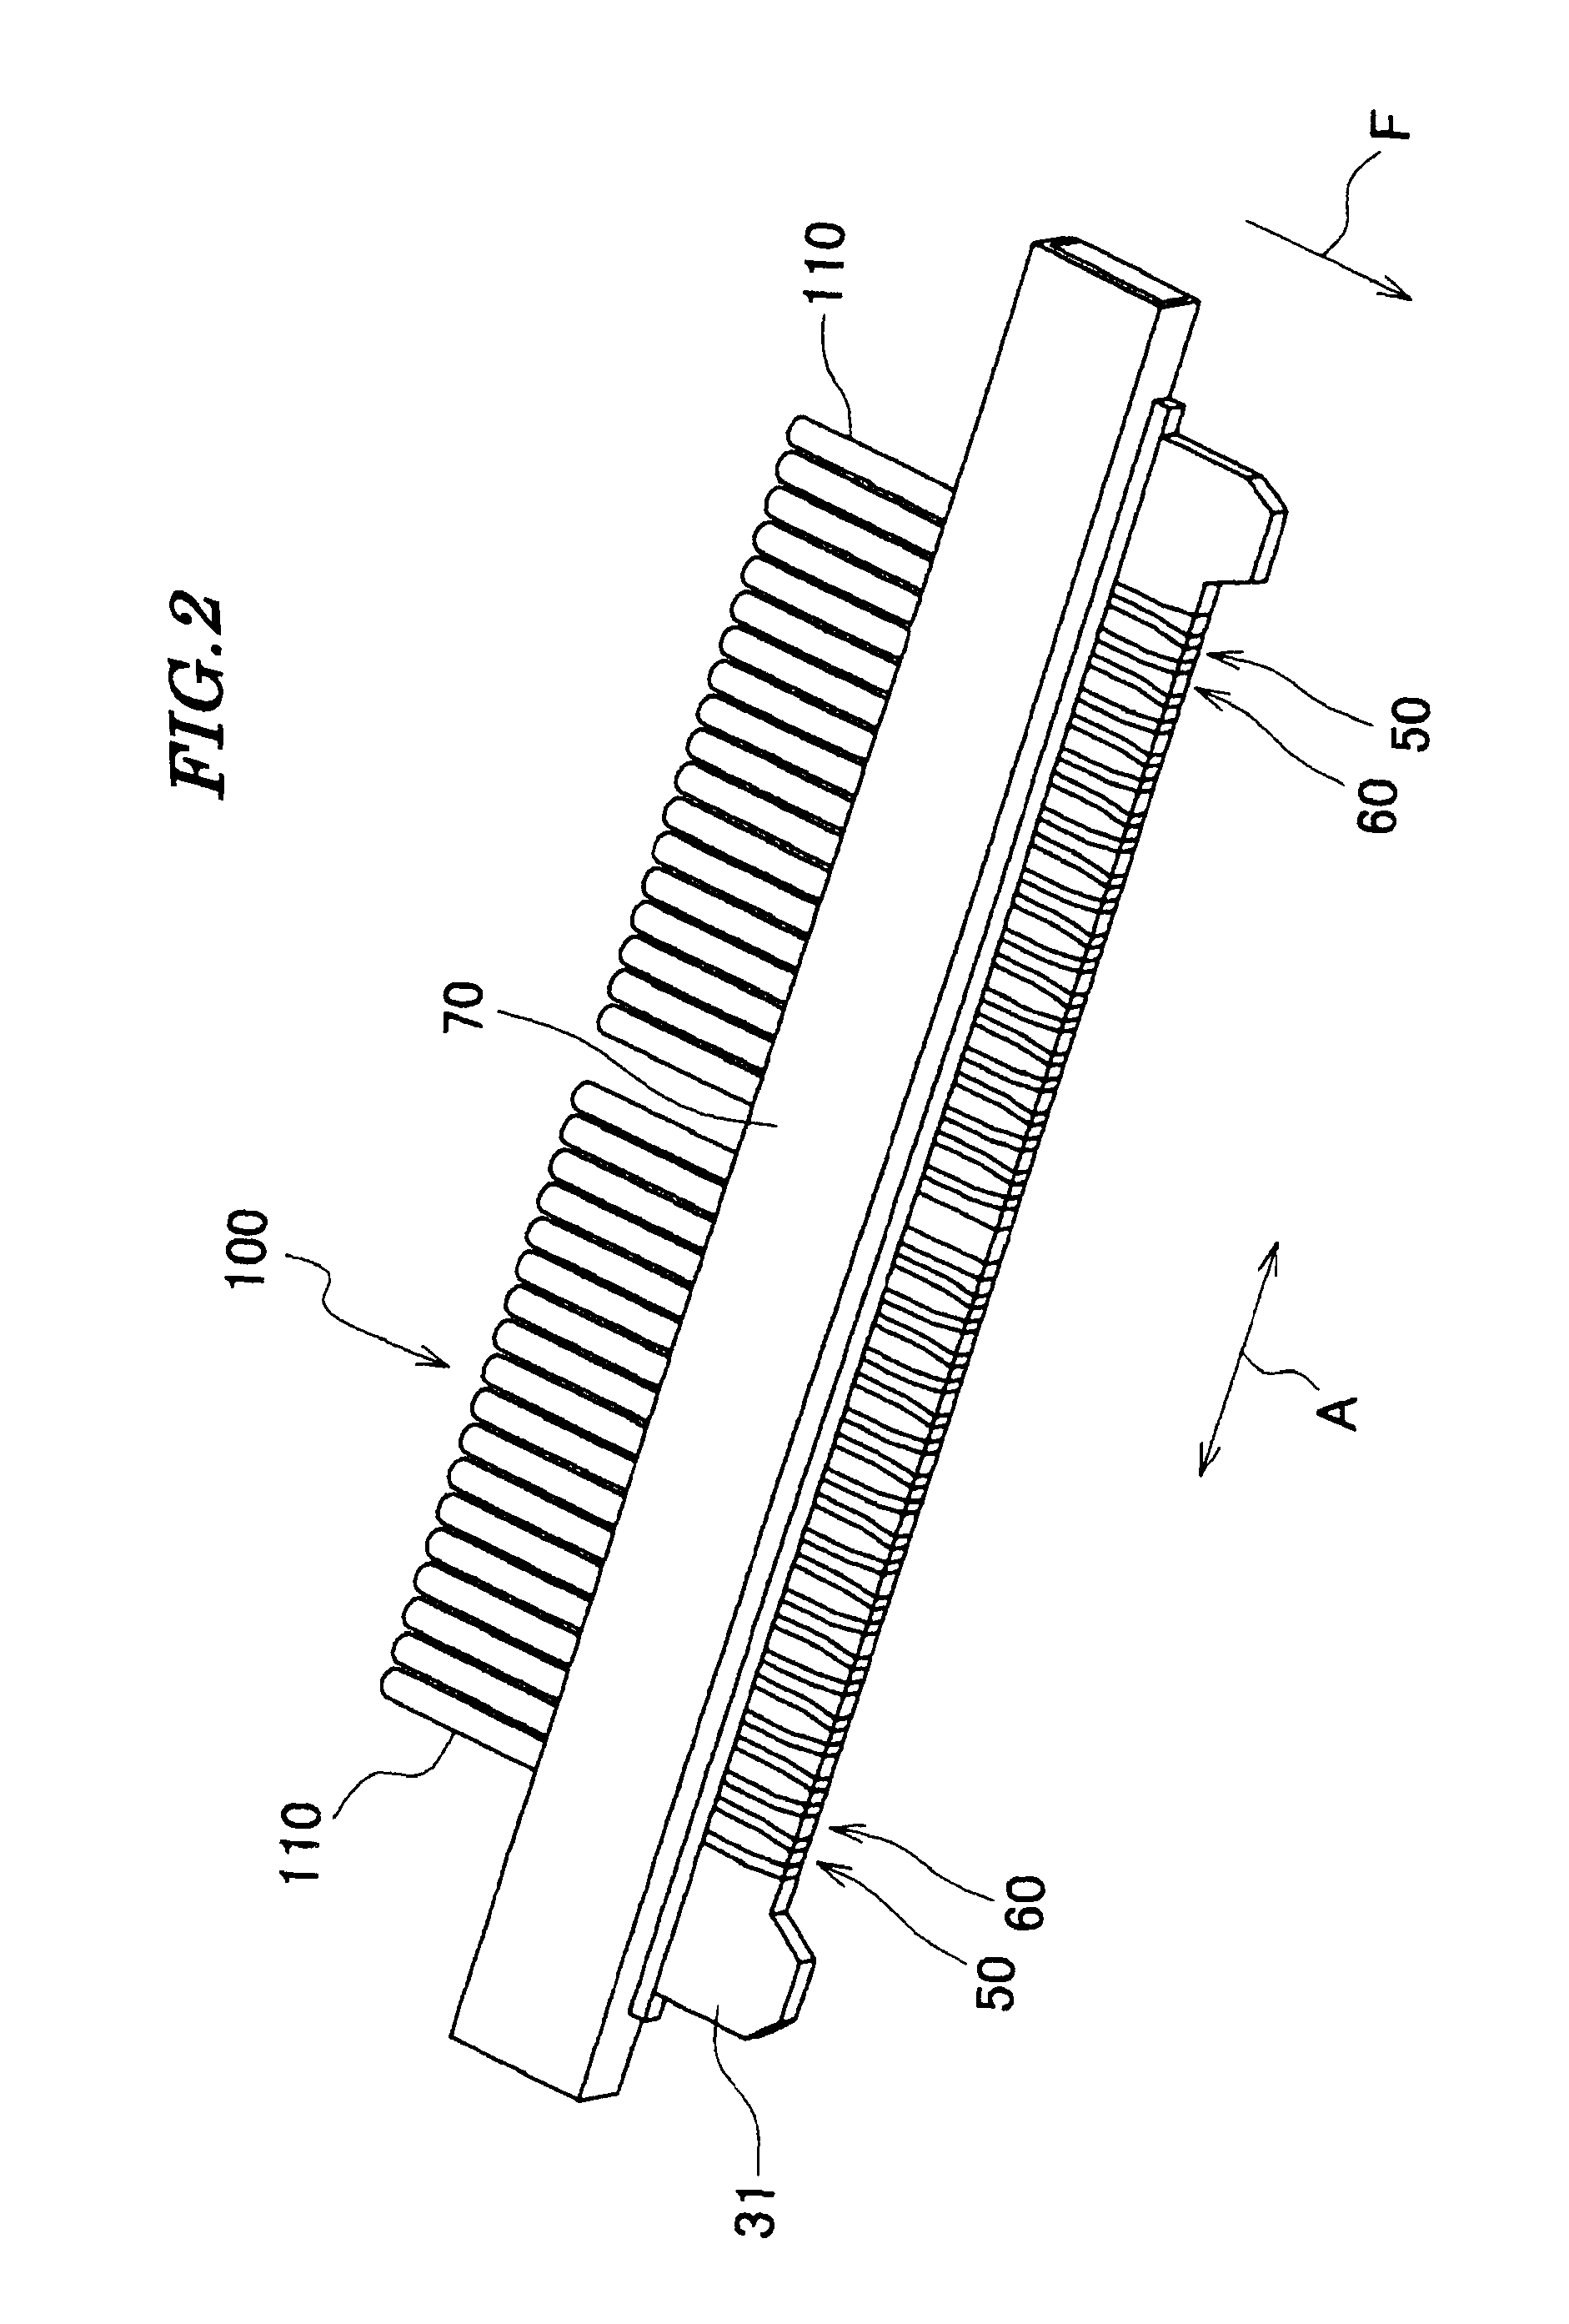 Connector having contacts with a linkage portion having a width smaller than that of the contact portion